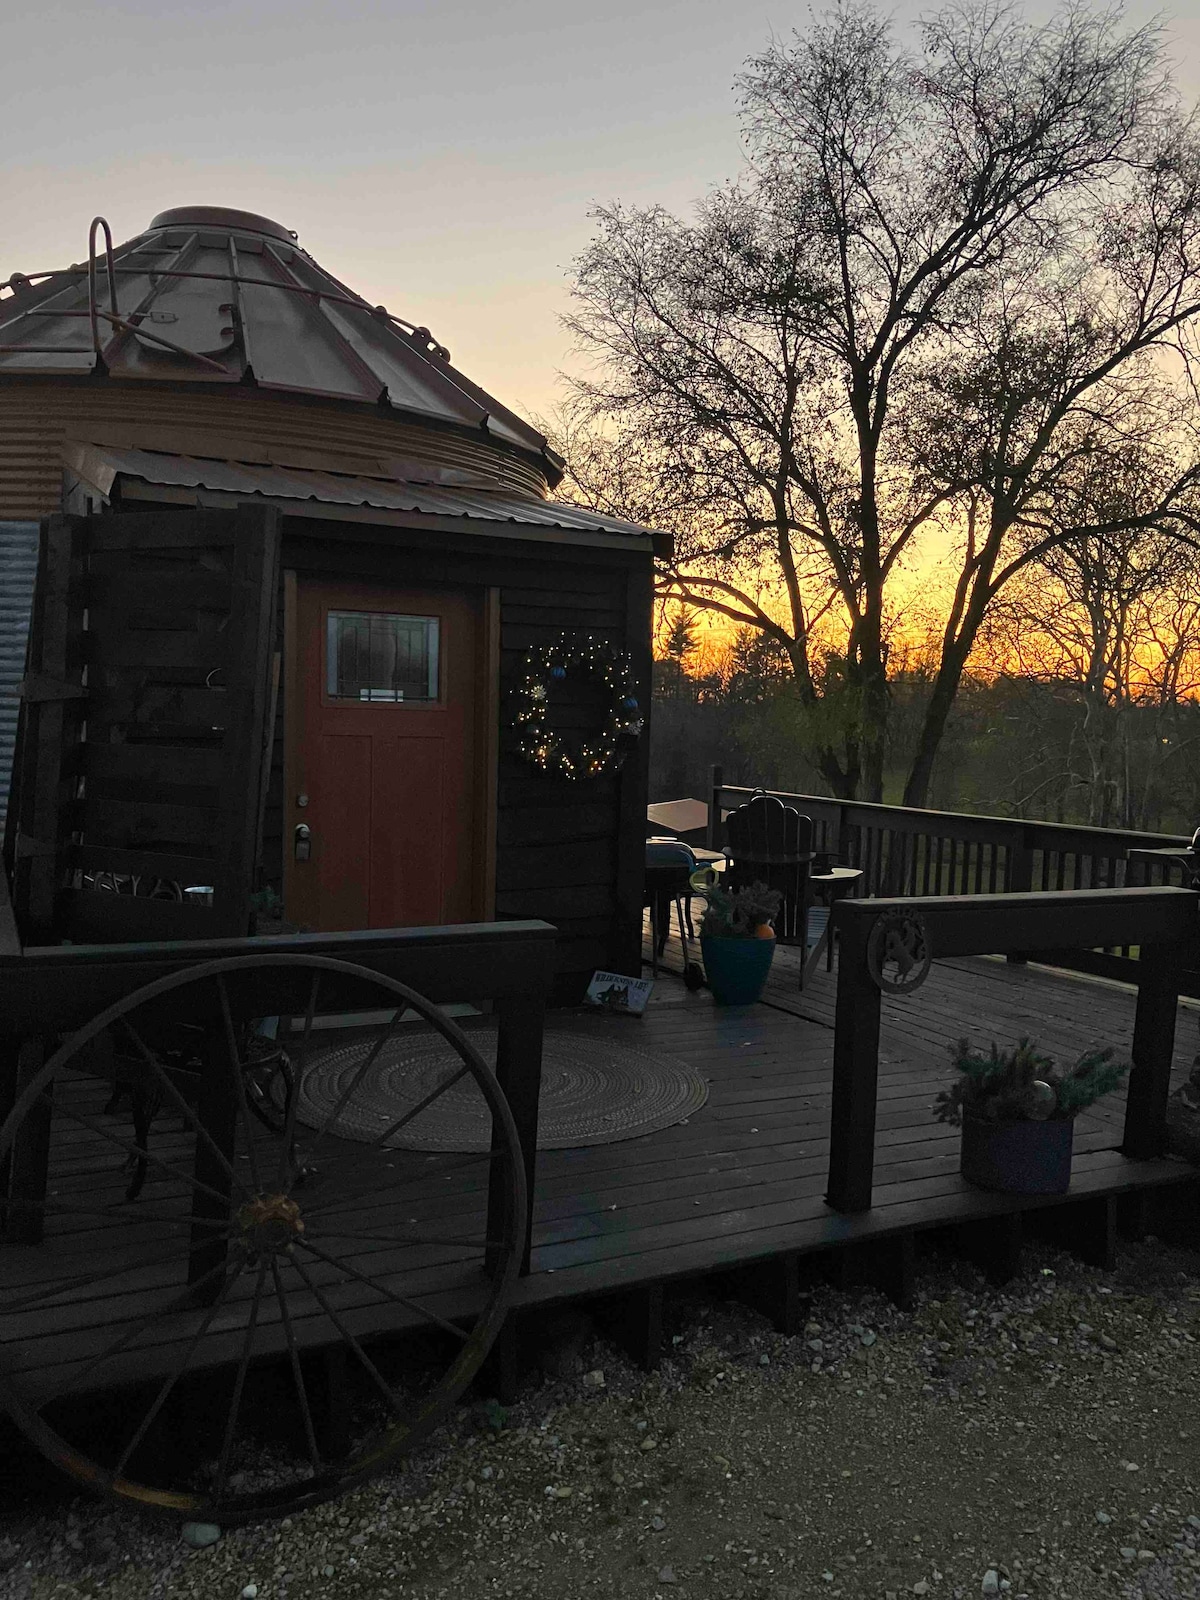 The Bunkhouse at Love 's Hideaway